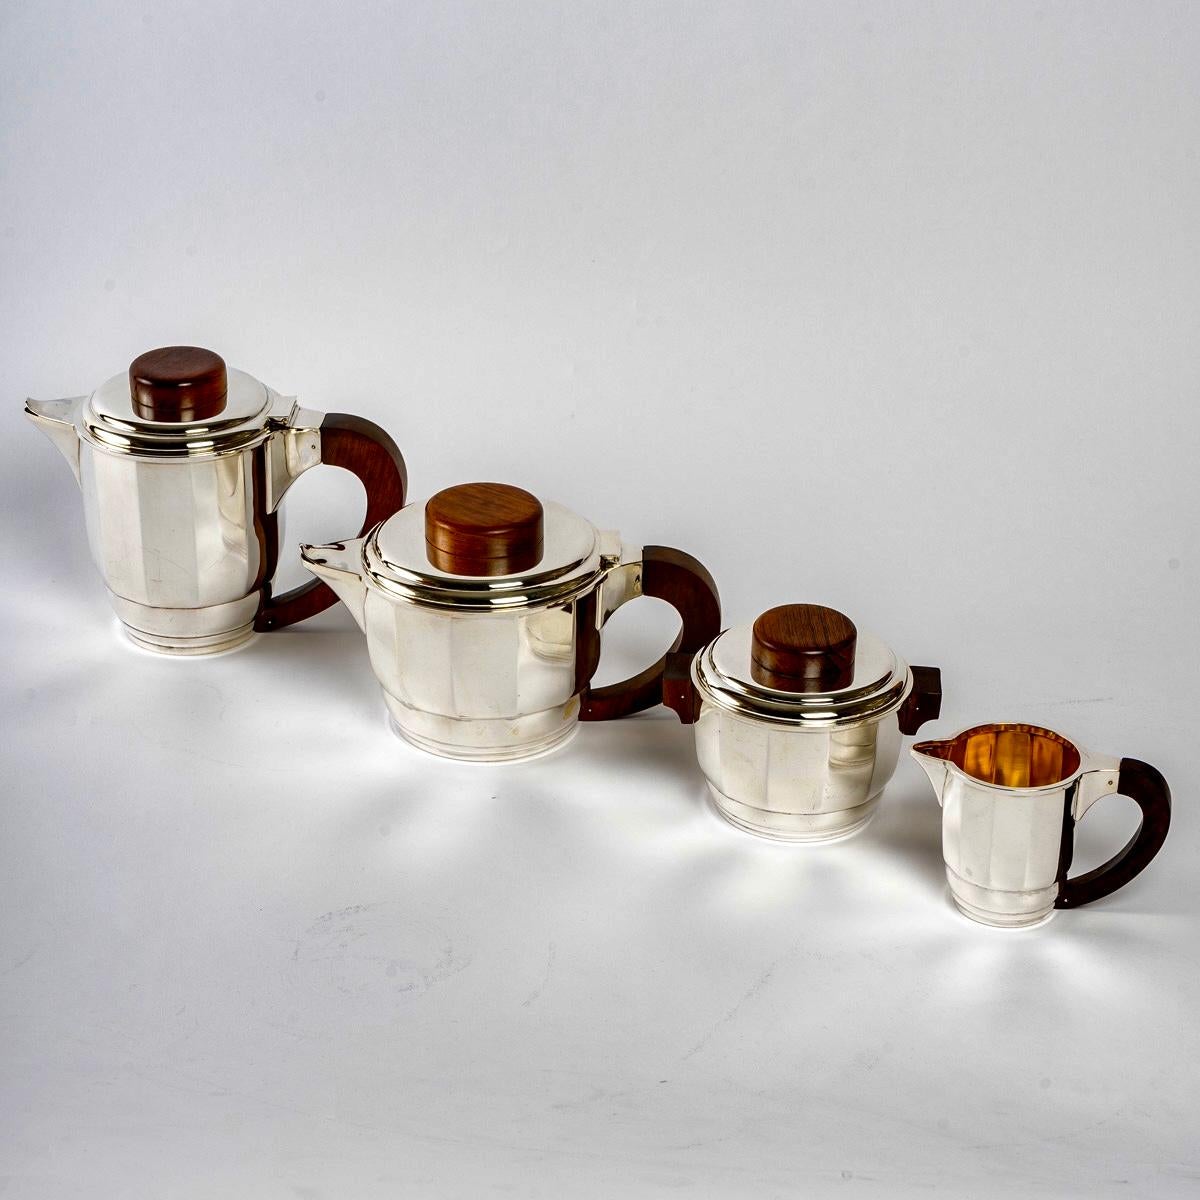 Art Deco tea and coffee set in sterling pure silver and rosewood by Puiforcat created in the 1925s.

Service including:
- a coffee pot 
- a teapot 
- a milkpot
- a sugar pot 

Minerve Solid Silver 950/1000 French mark - maker's stamp on each